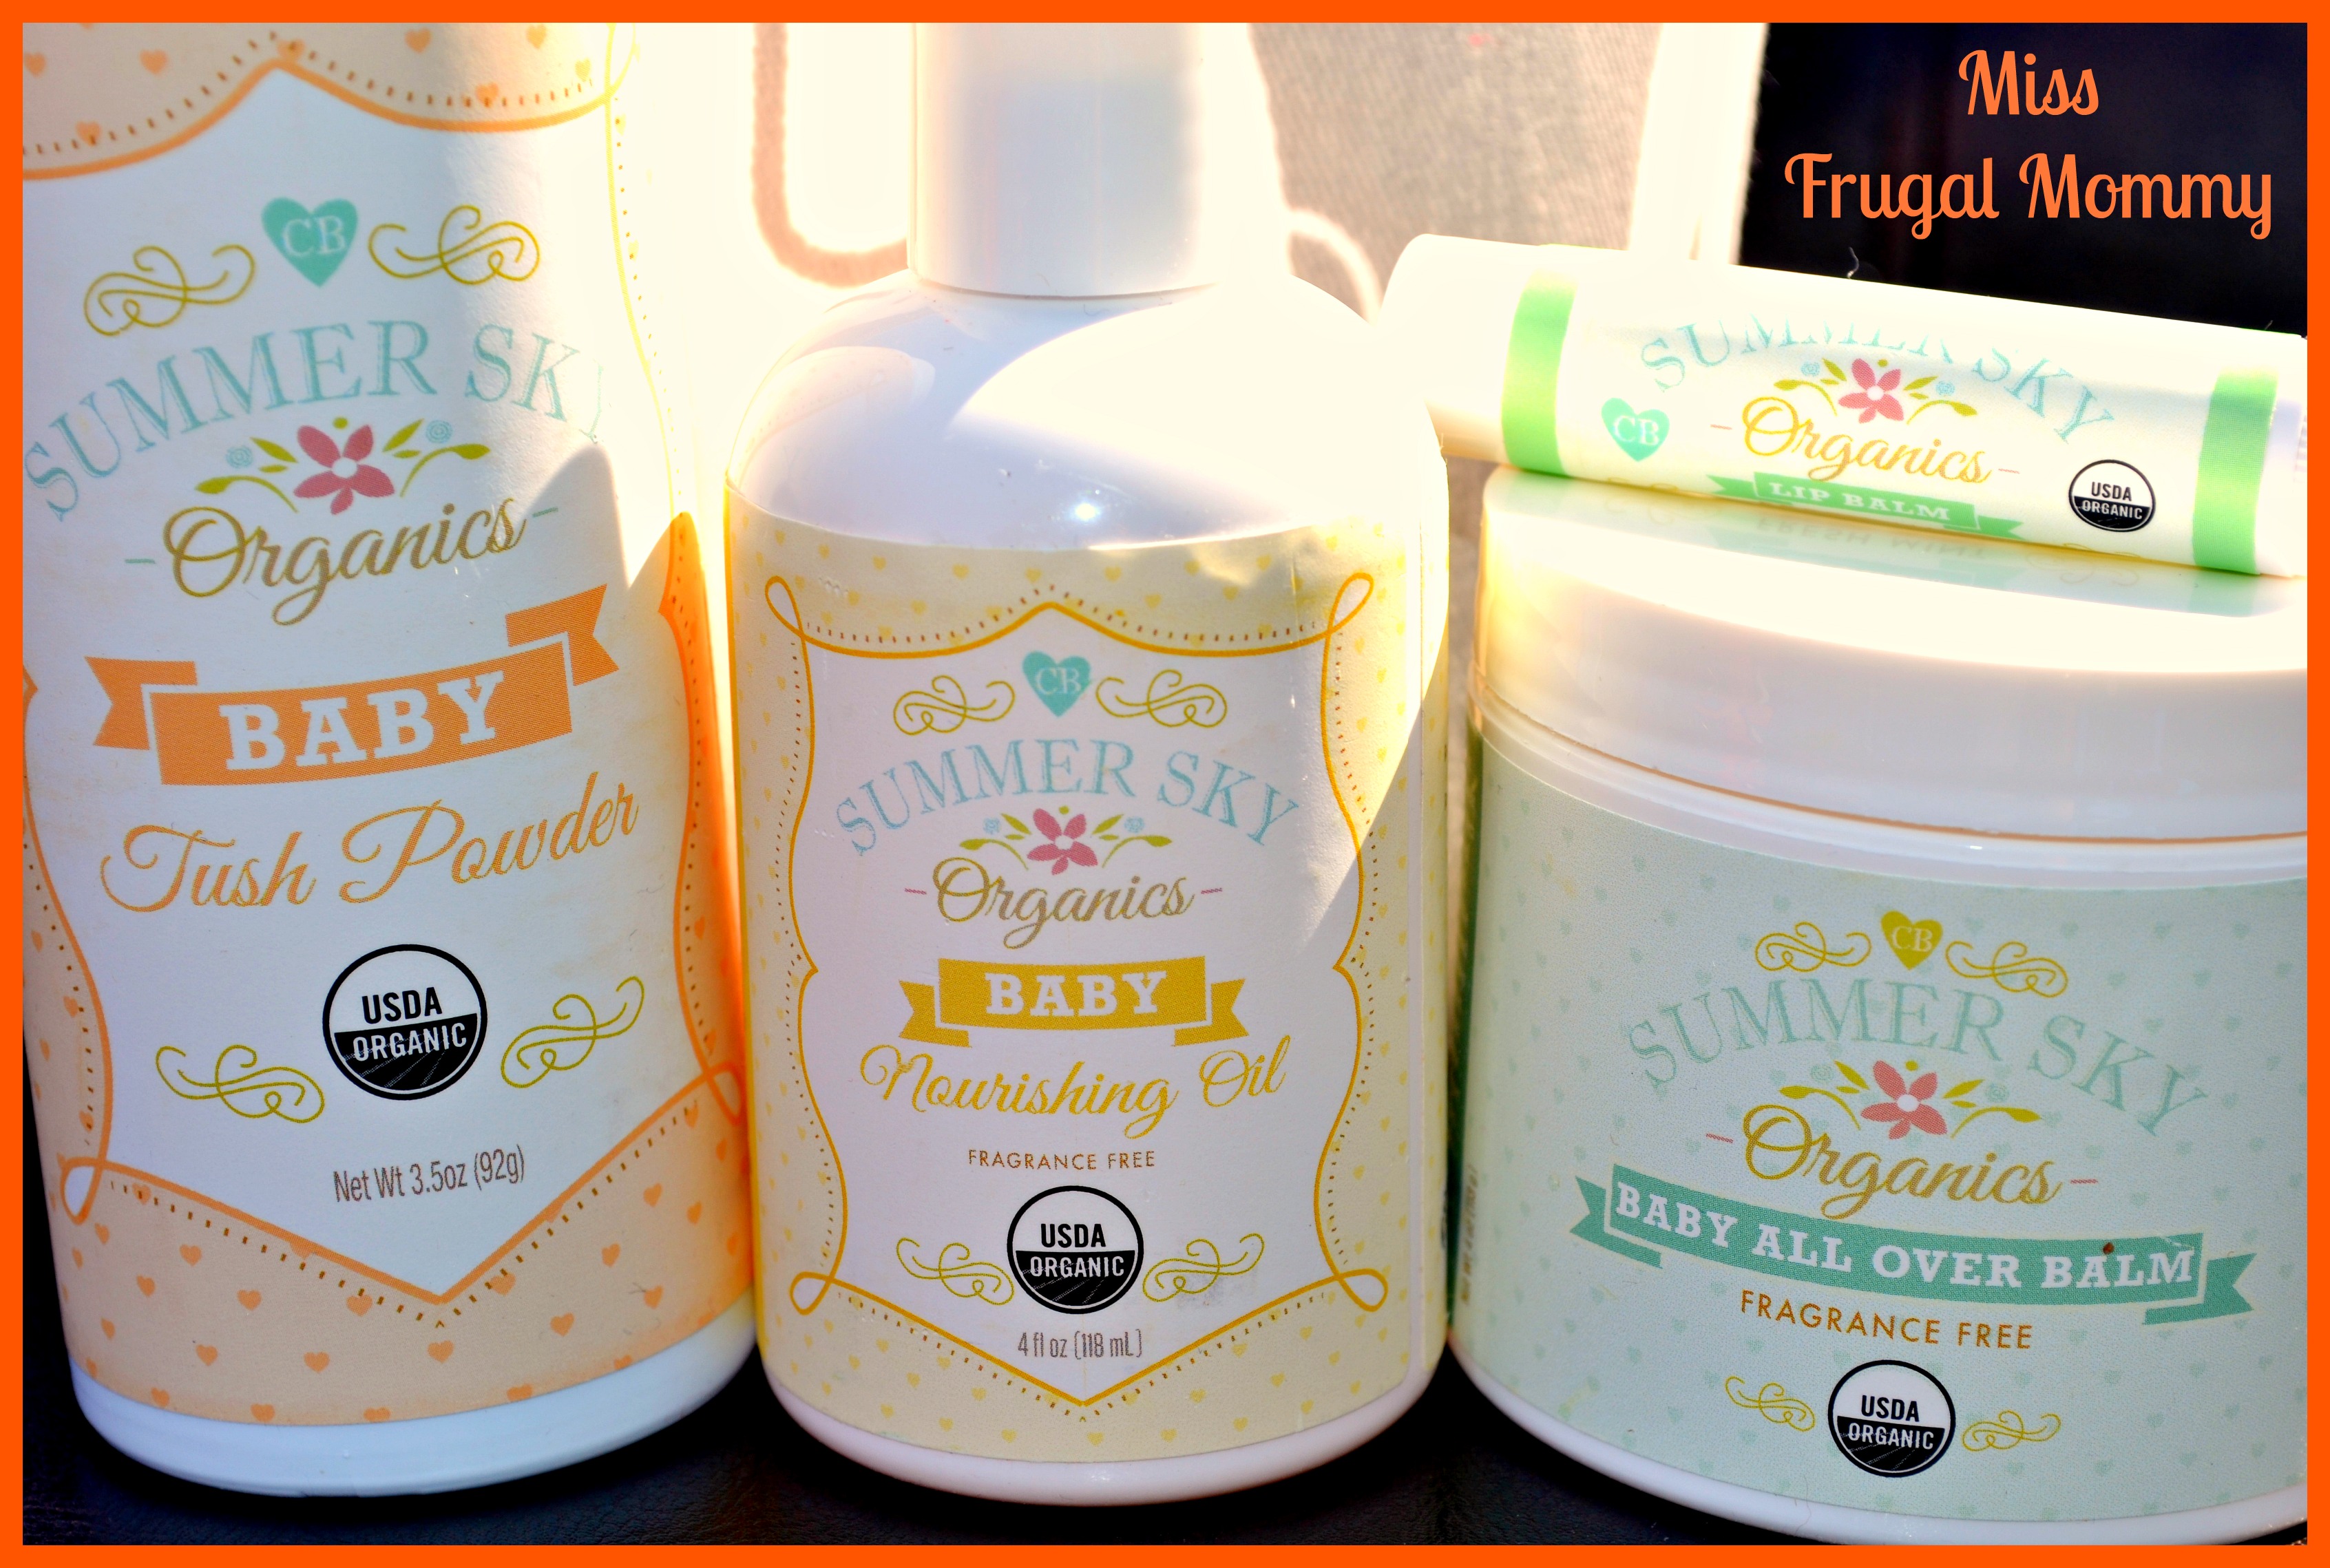 Summer SKy Organics Review (Getting Ready For Baby Gift Guide)